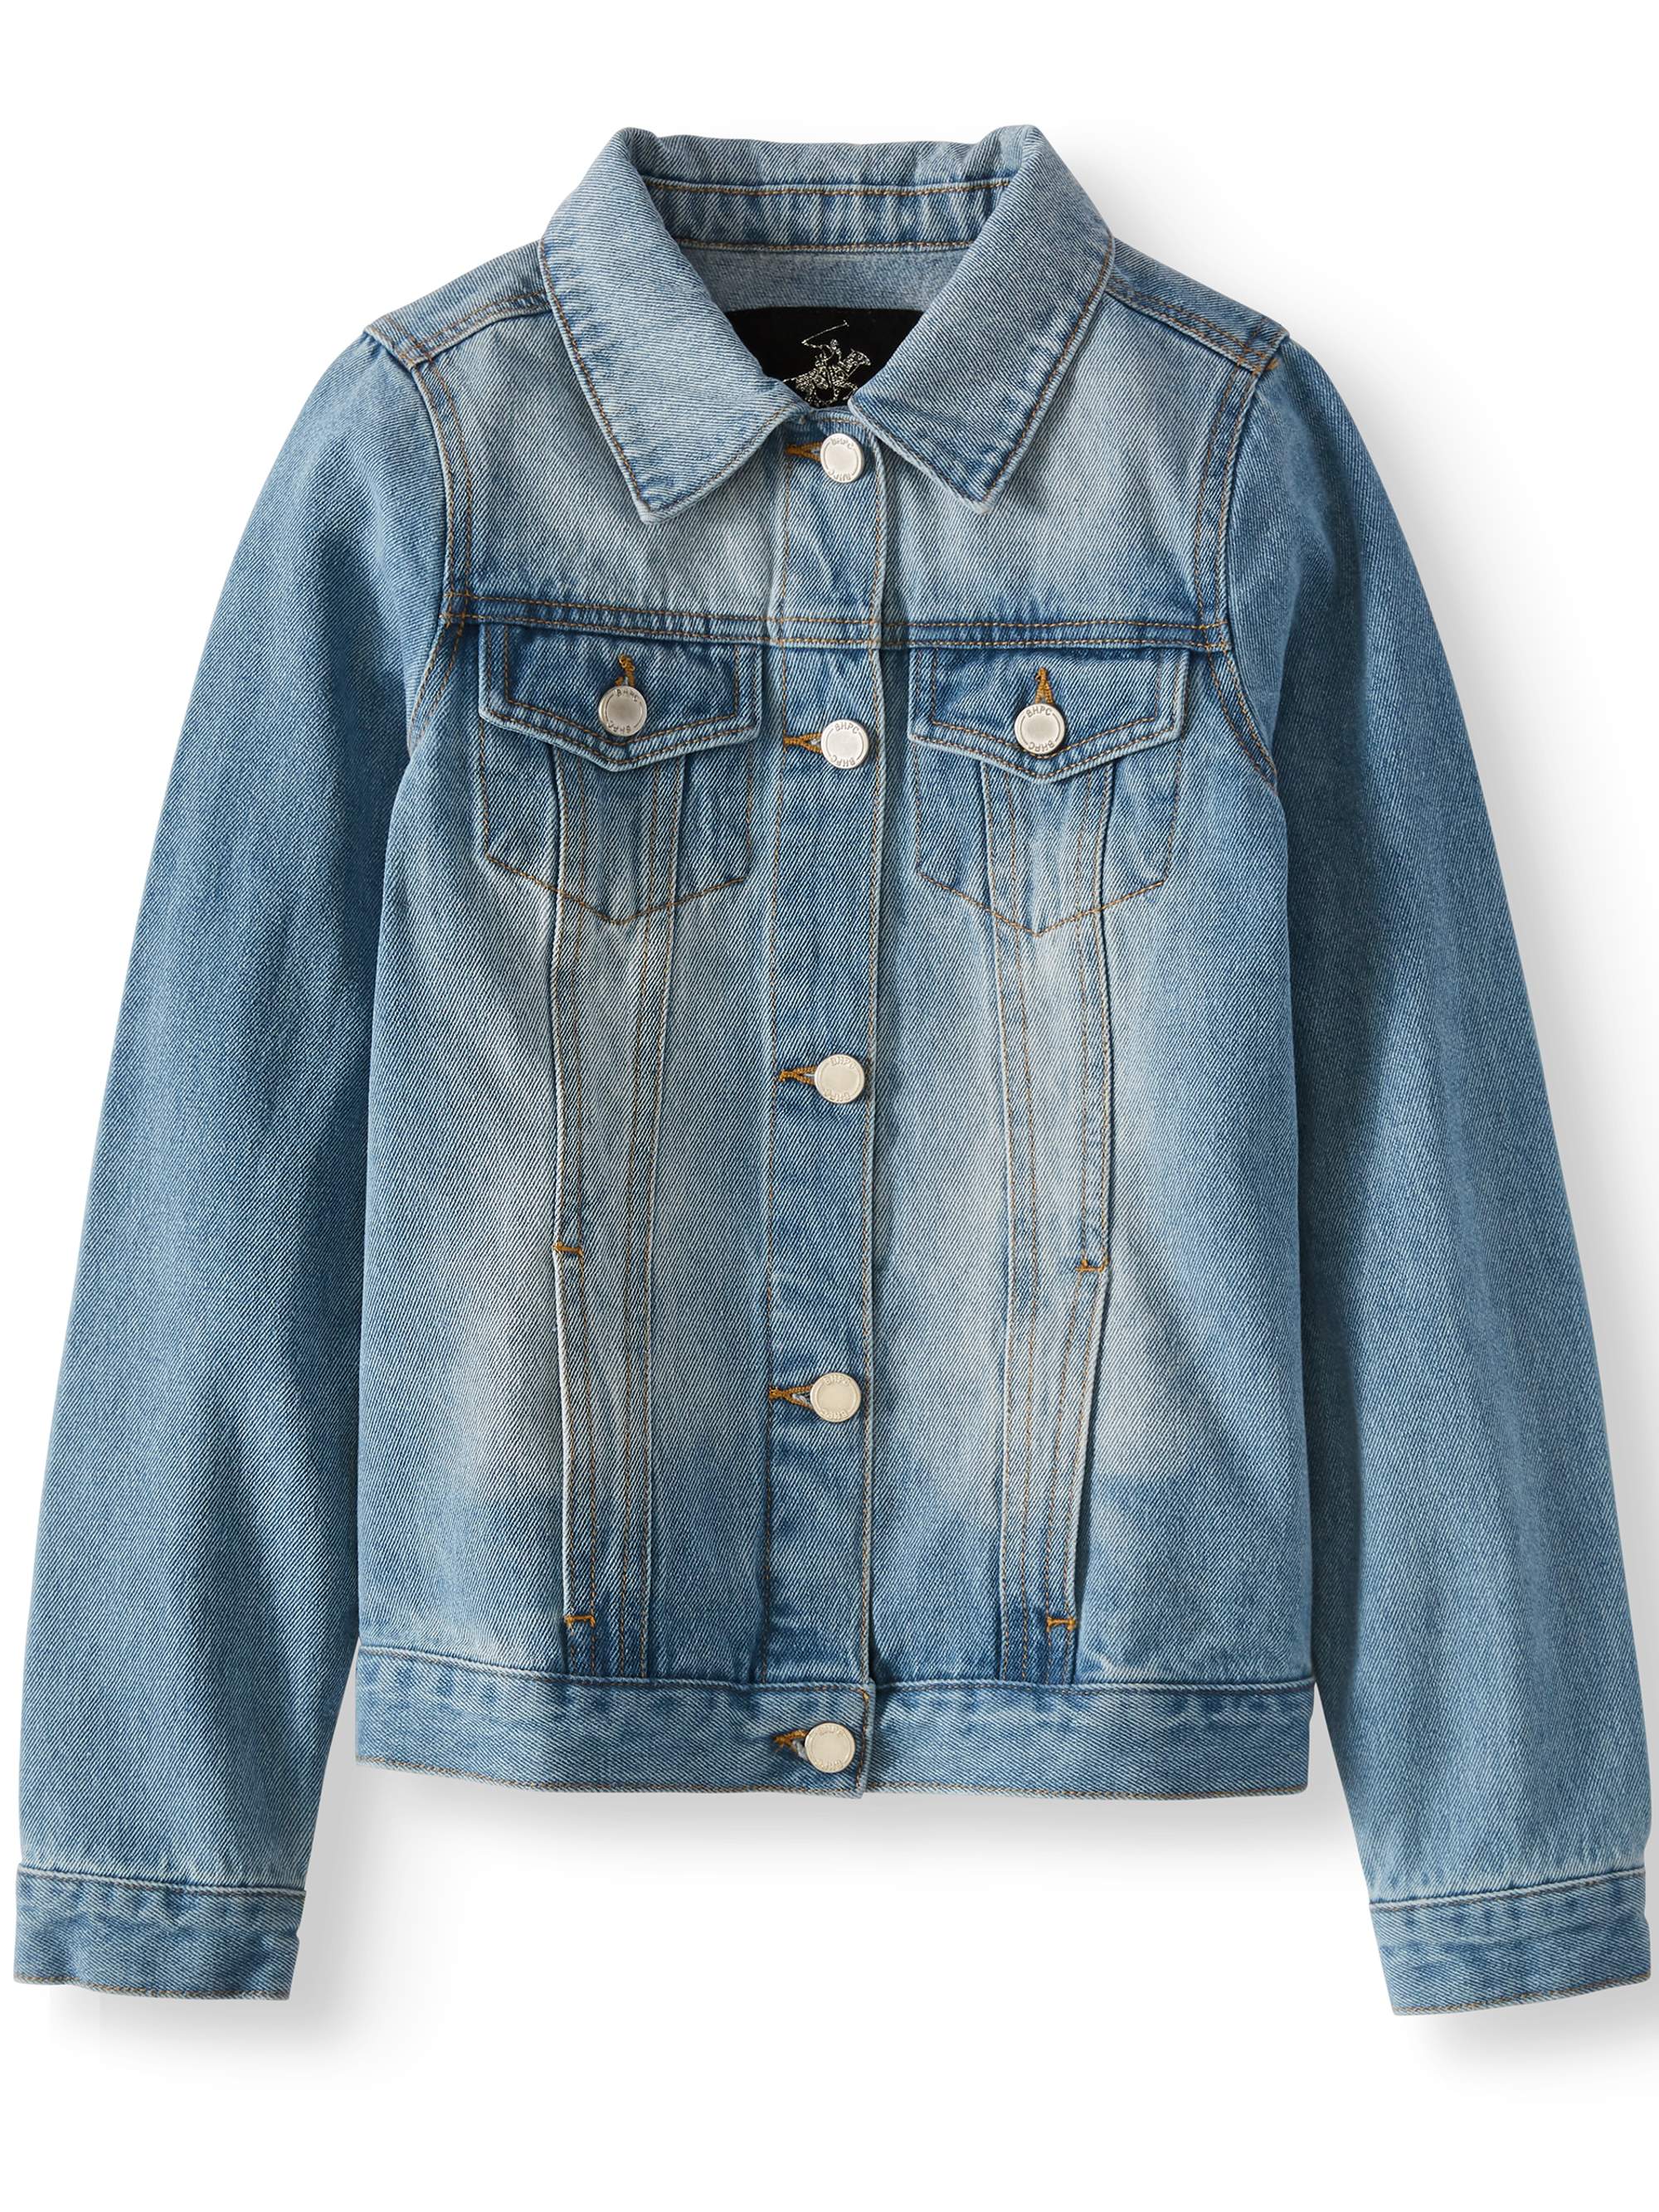 Beverly Hills Polo Club Girls 4-16 Denim Jean Jacket with Pockets - image 1 of 3